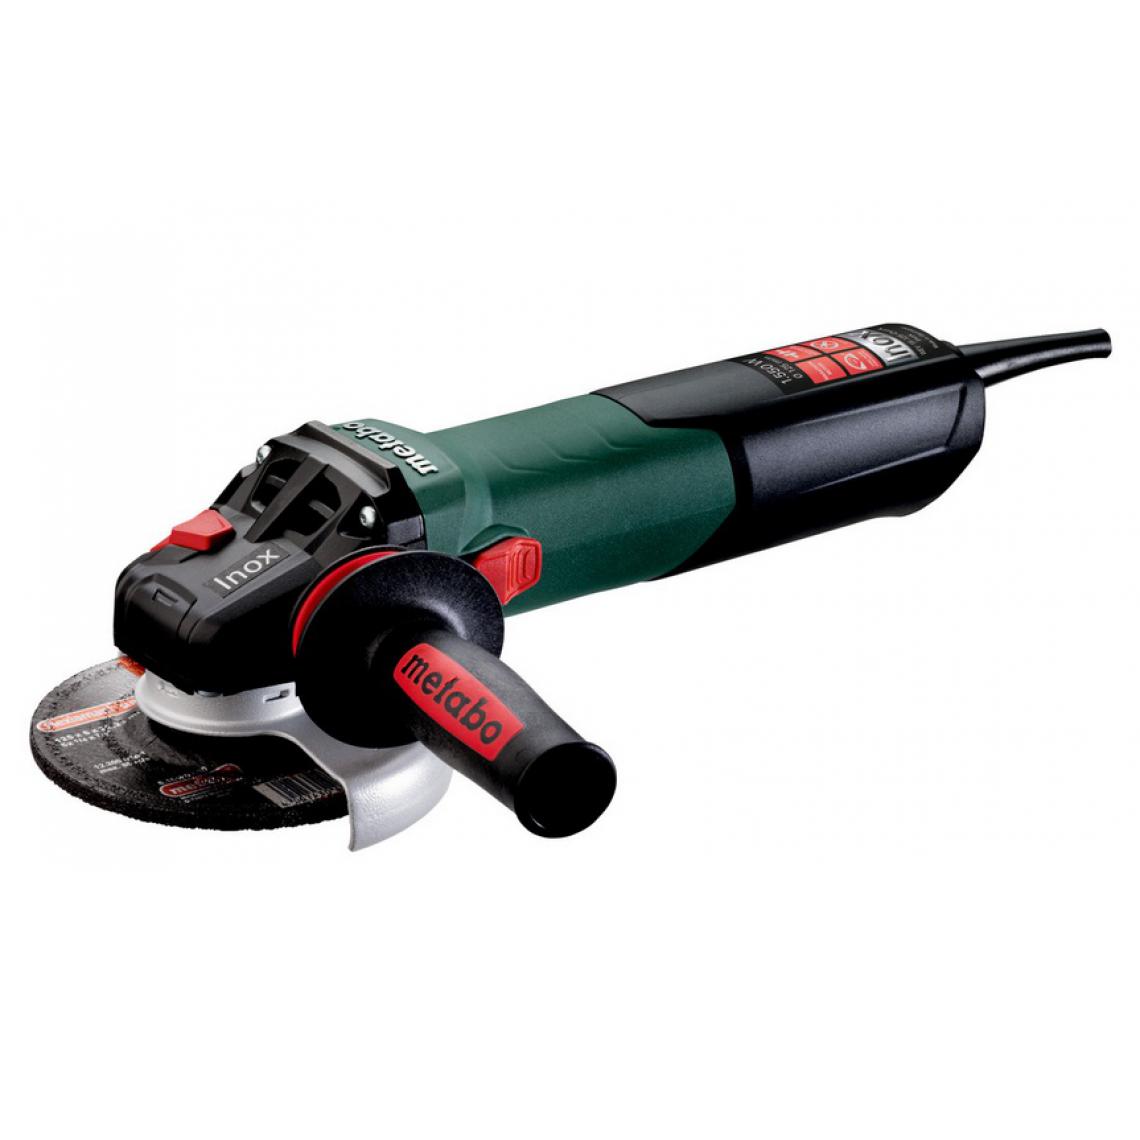 Metabo - Metabo - Meuleuse d'angle 1550W 125mm - WEV 15-125 Quick Inox - Meuleuses